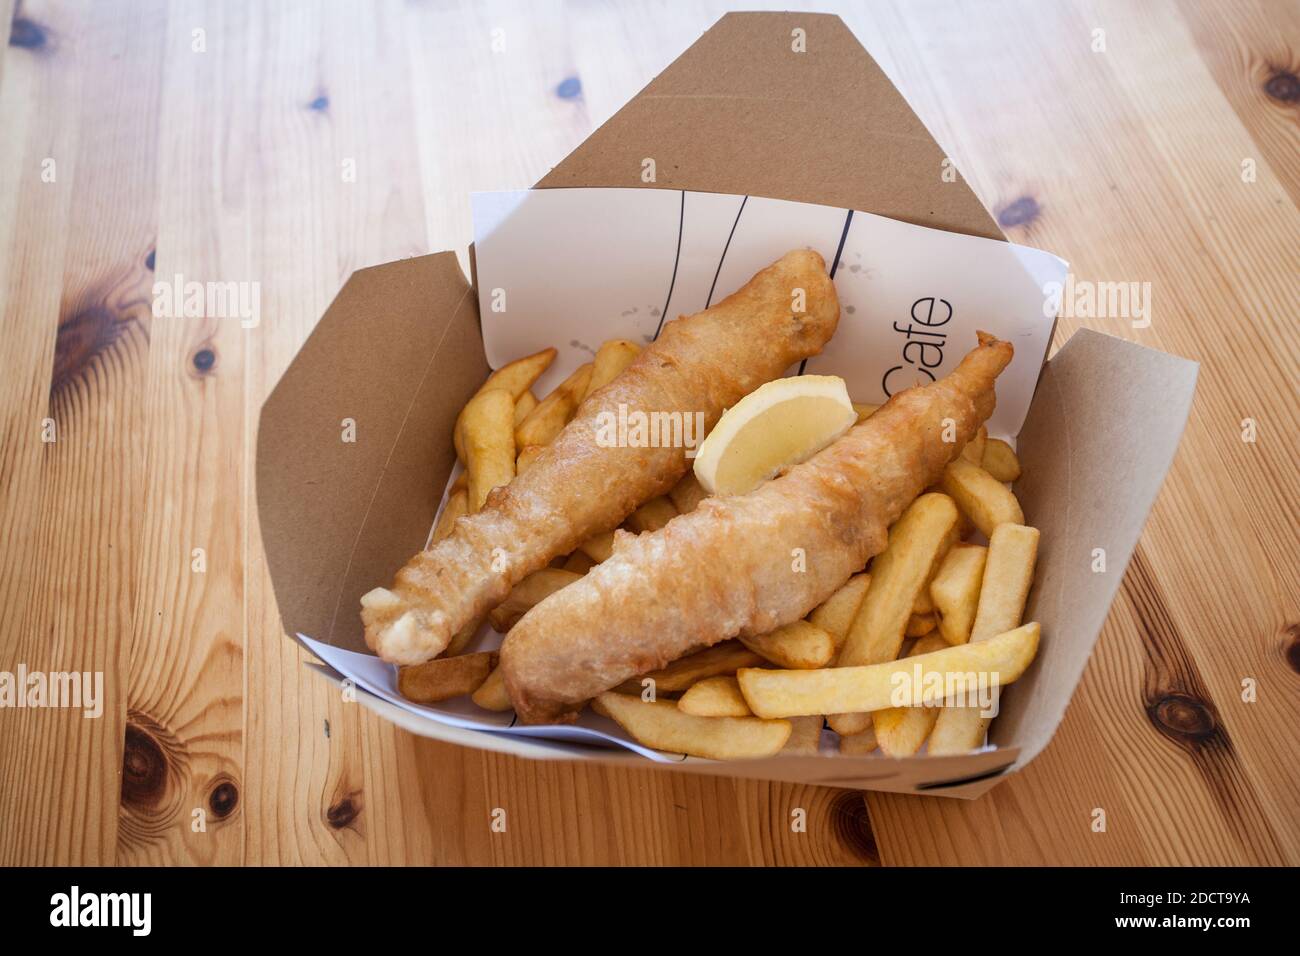 freshly cooked high quality fish and chips porthminster beach cafe takeaway box on wood table Stock Photo